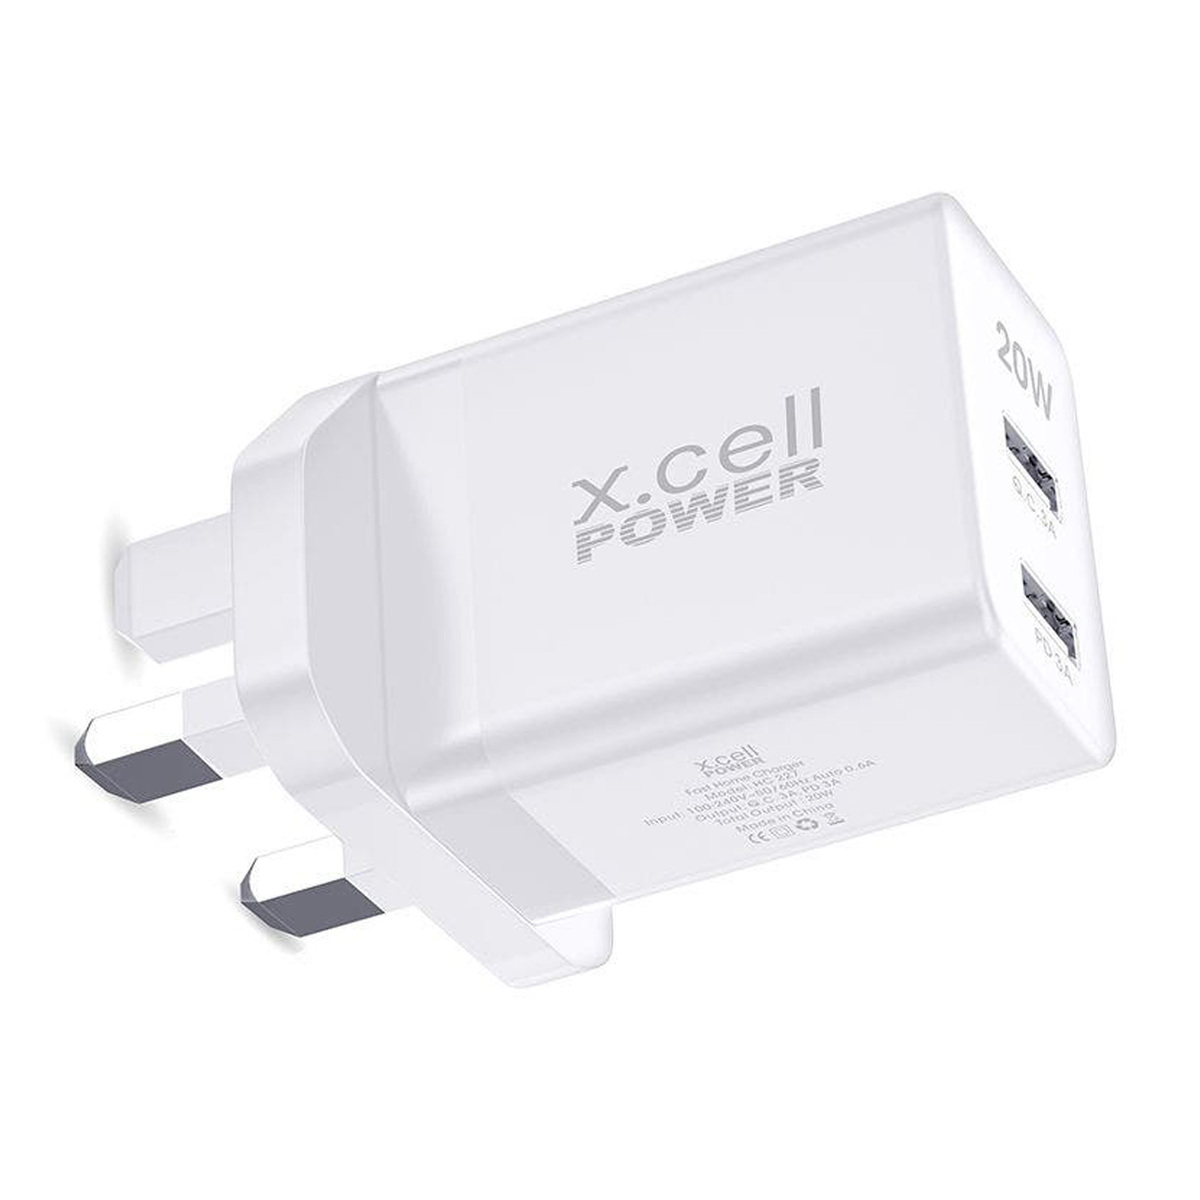 X.Cell 20 W Home charger, White, HC-227